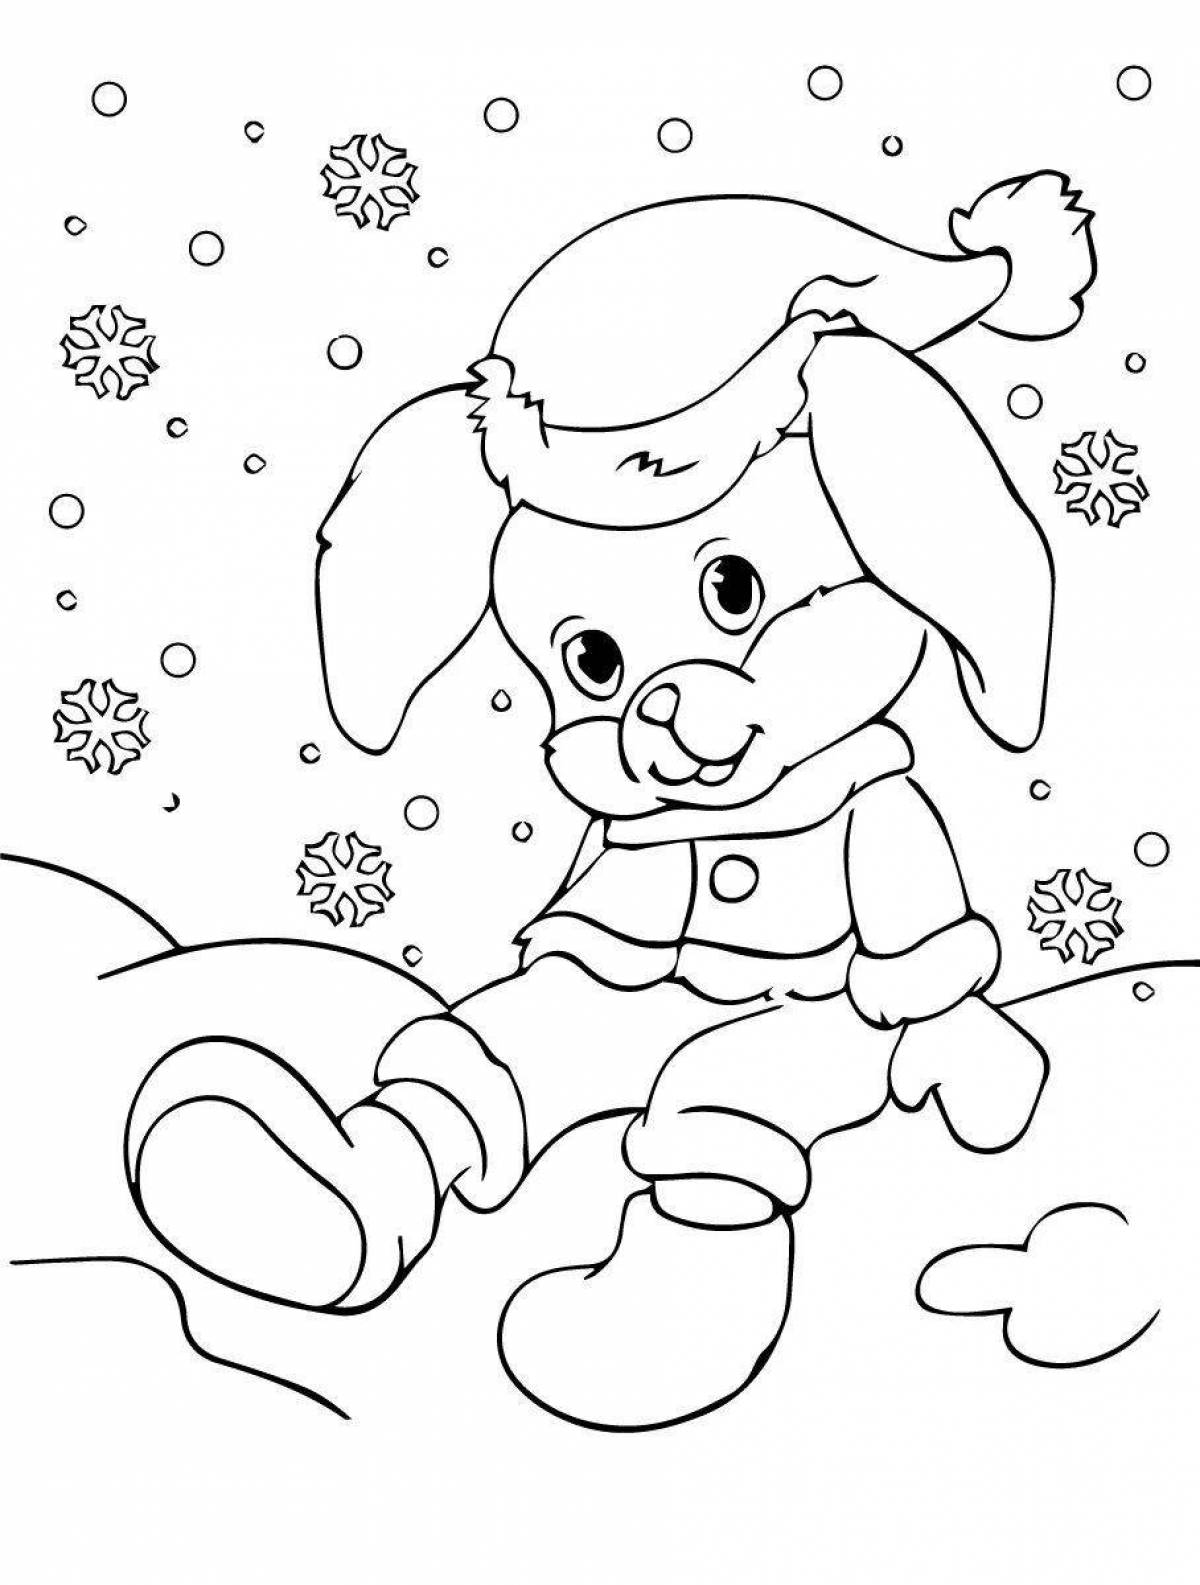 Cute bunny coloring with a hat